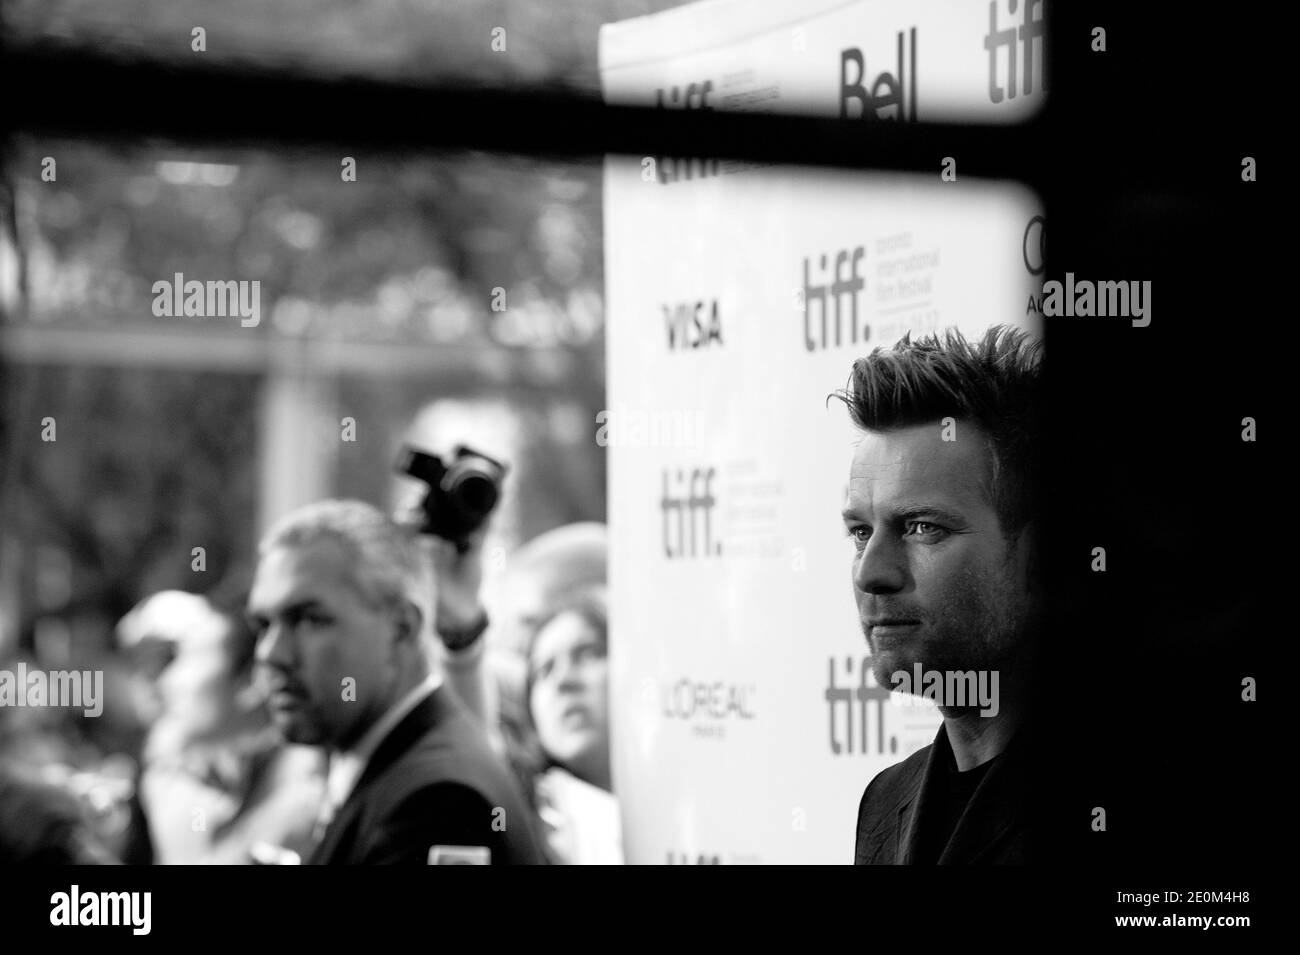 Ewan McGregor attends 'The Impossible' screening during the 37th Toronto International Film Festival TIFF, in Toronto, Canada on September 9, 2012. Photo by Lionel Hahn/ABACAPRESS.COM Stock Photo